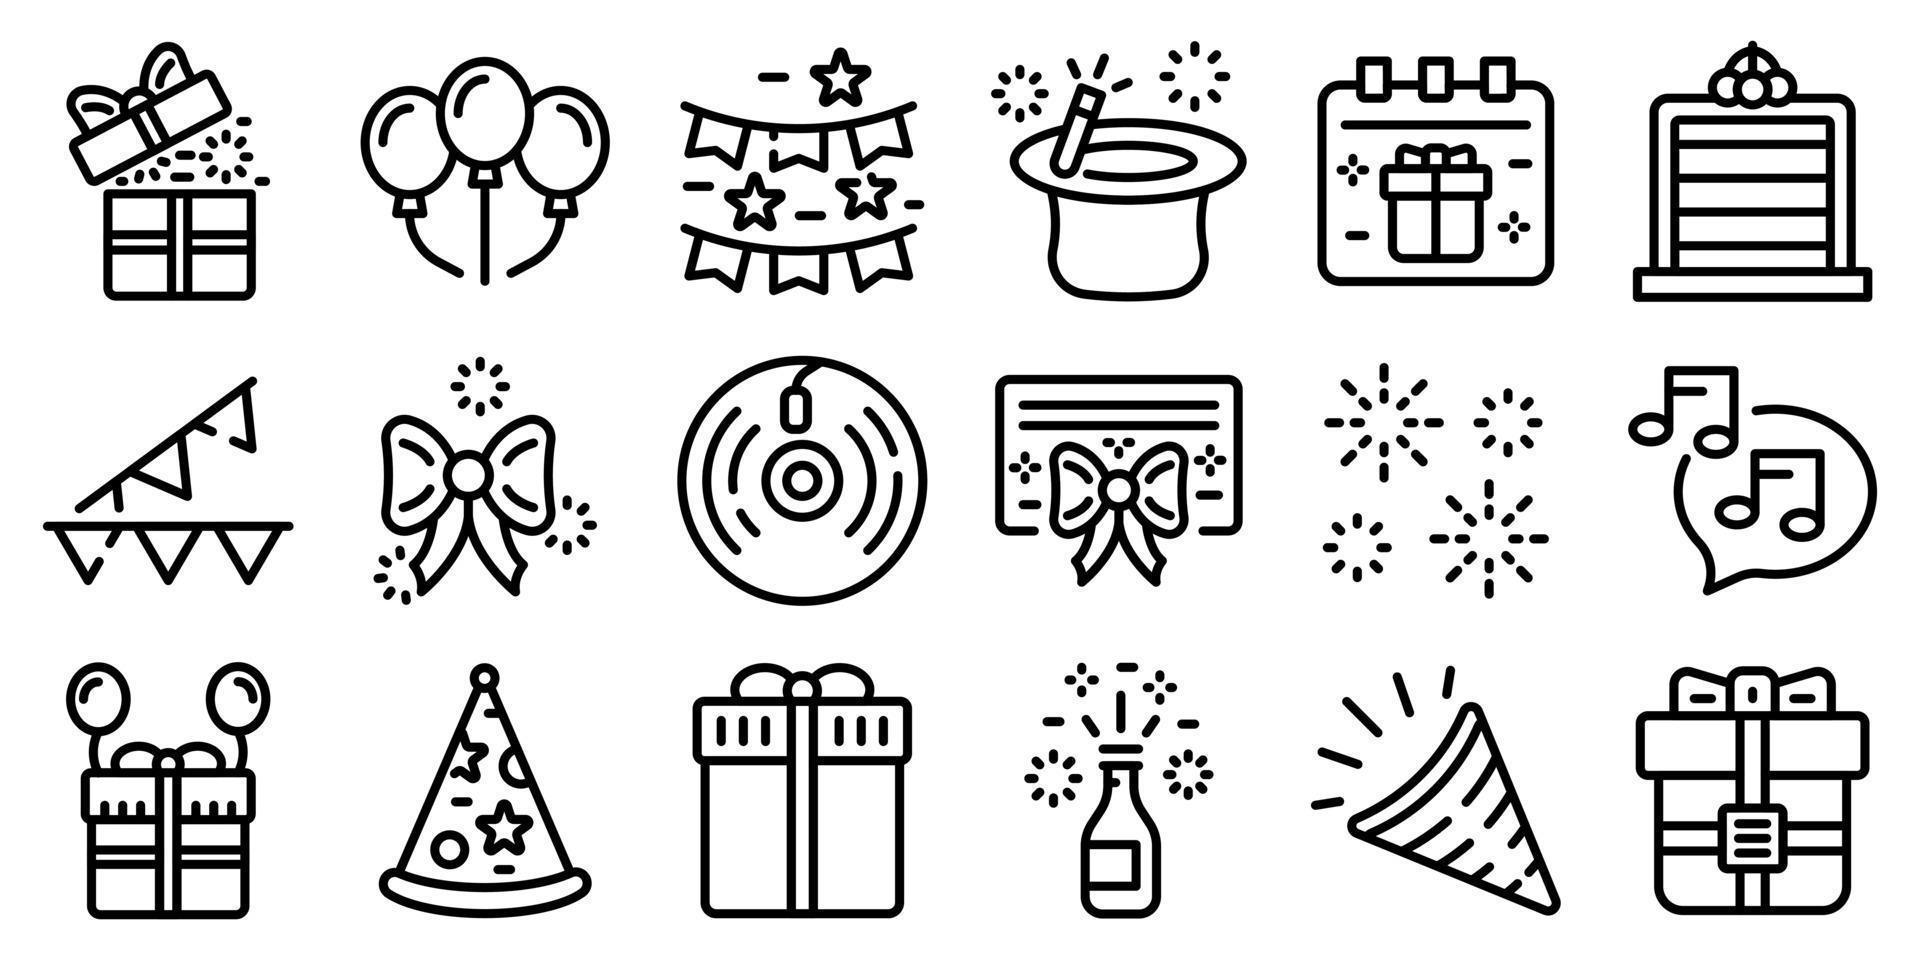 Surprise icons set, outline style vector